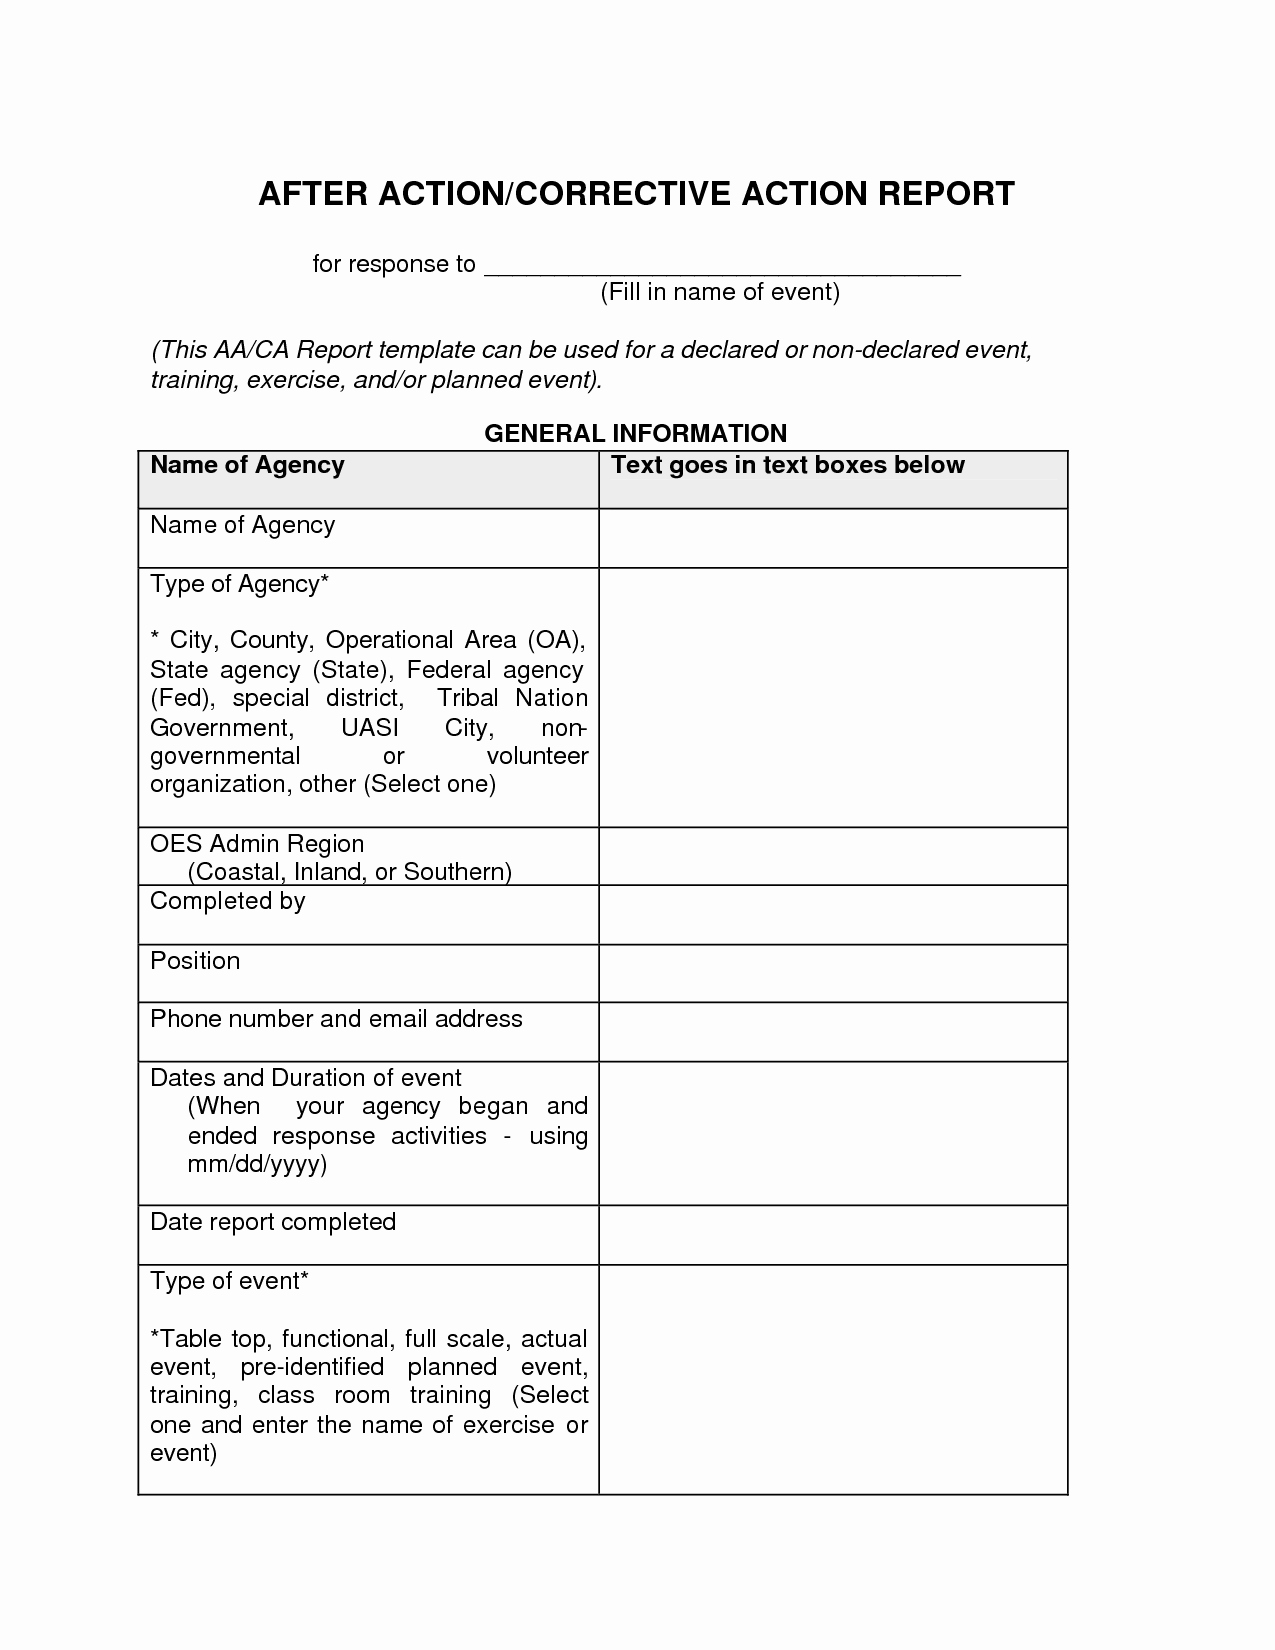 8d corrective action report template excel